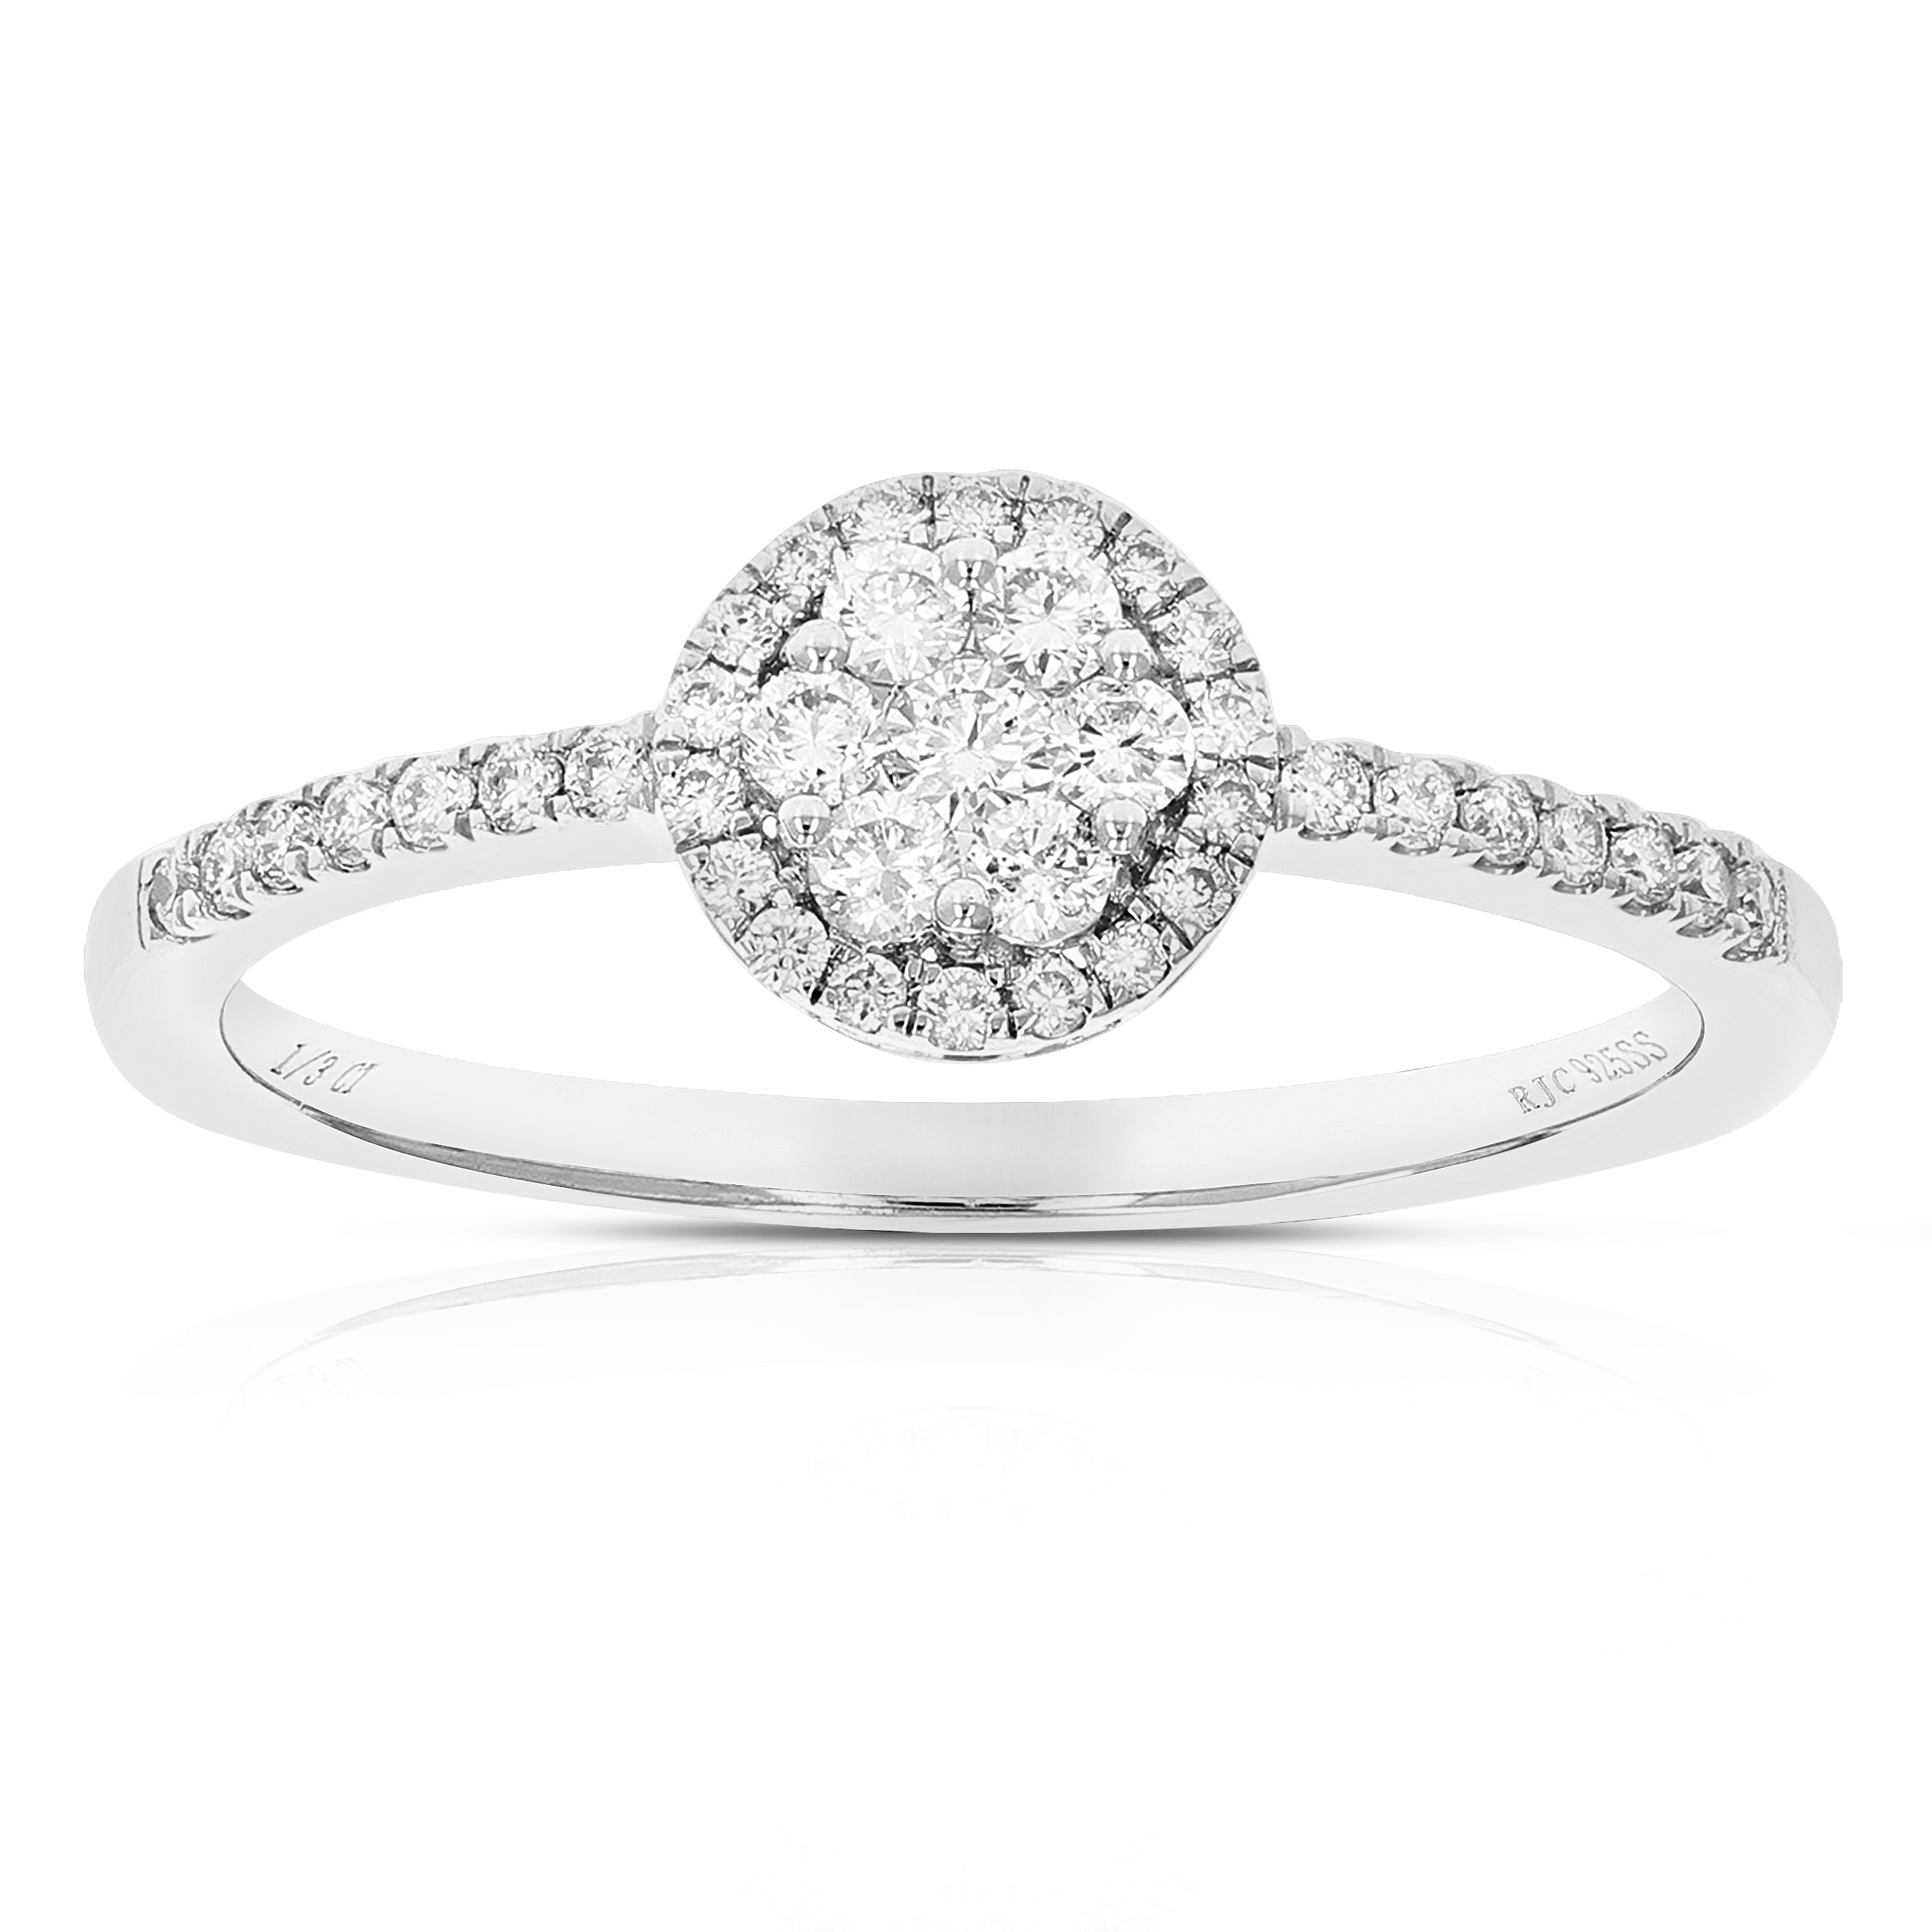 Floral Halo Cluster Diamond Engagement Ring